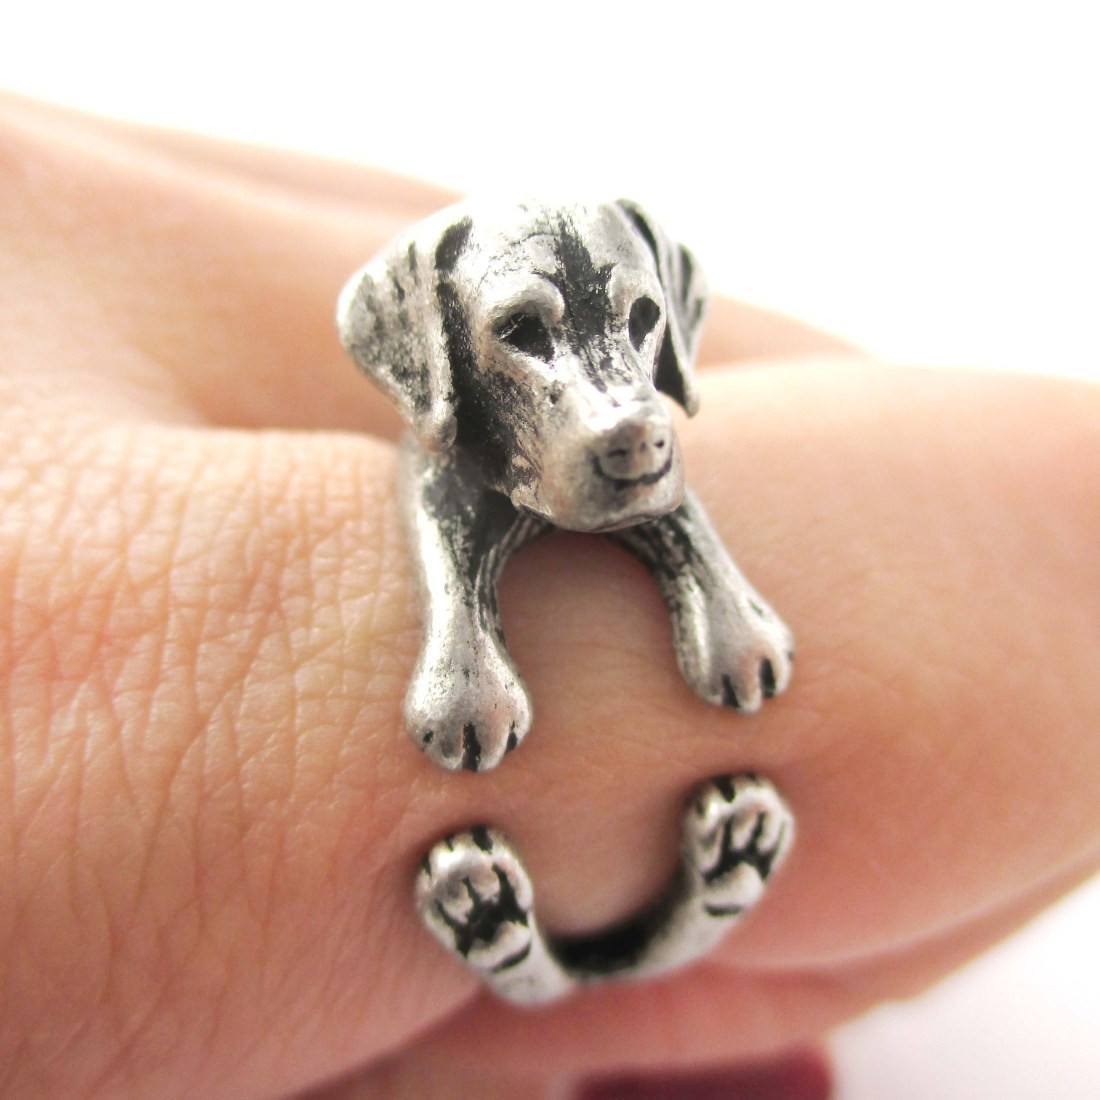 Realistic Labrador Retriever Shaped Animal Wrap Ring in Silver | Sizes 4 to 8.5